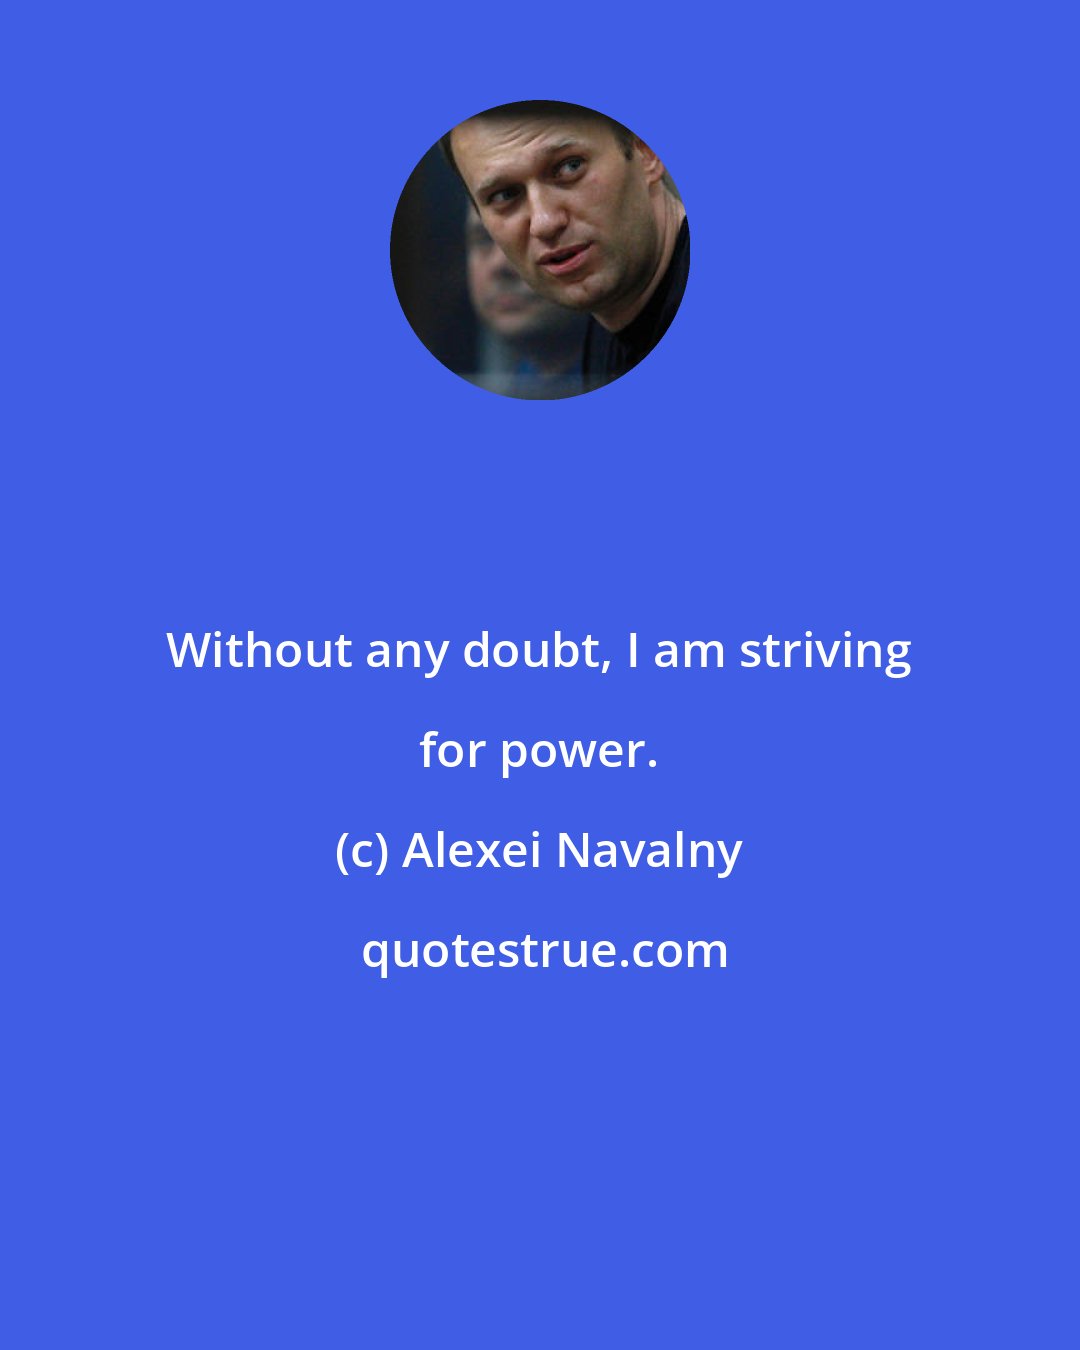 Alexei Navalny: Without any doubt, I am striving for power.